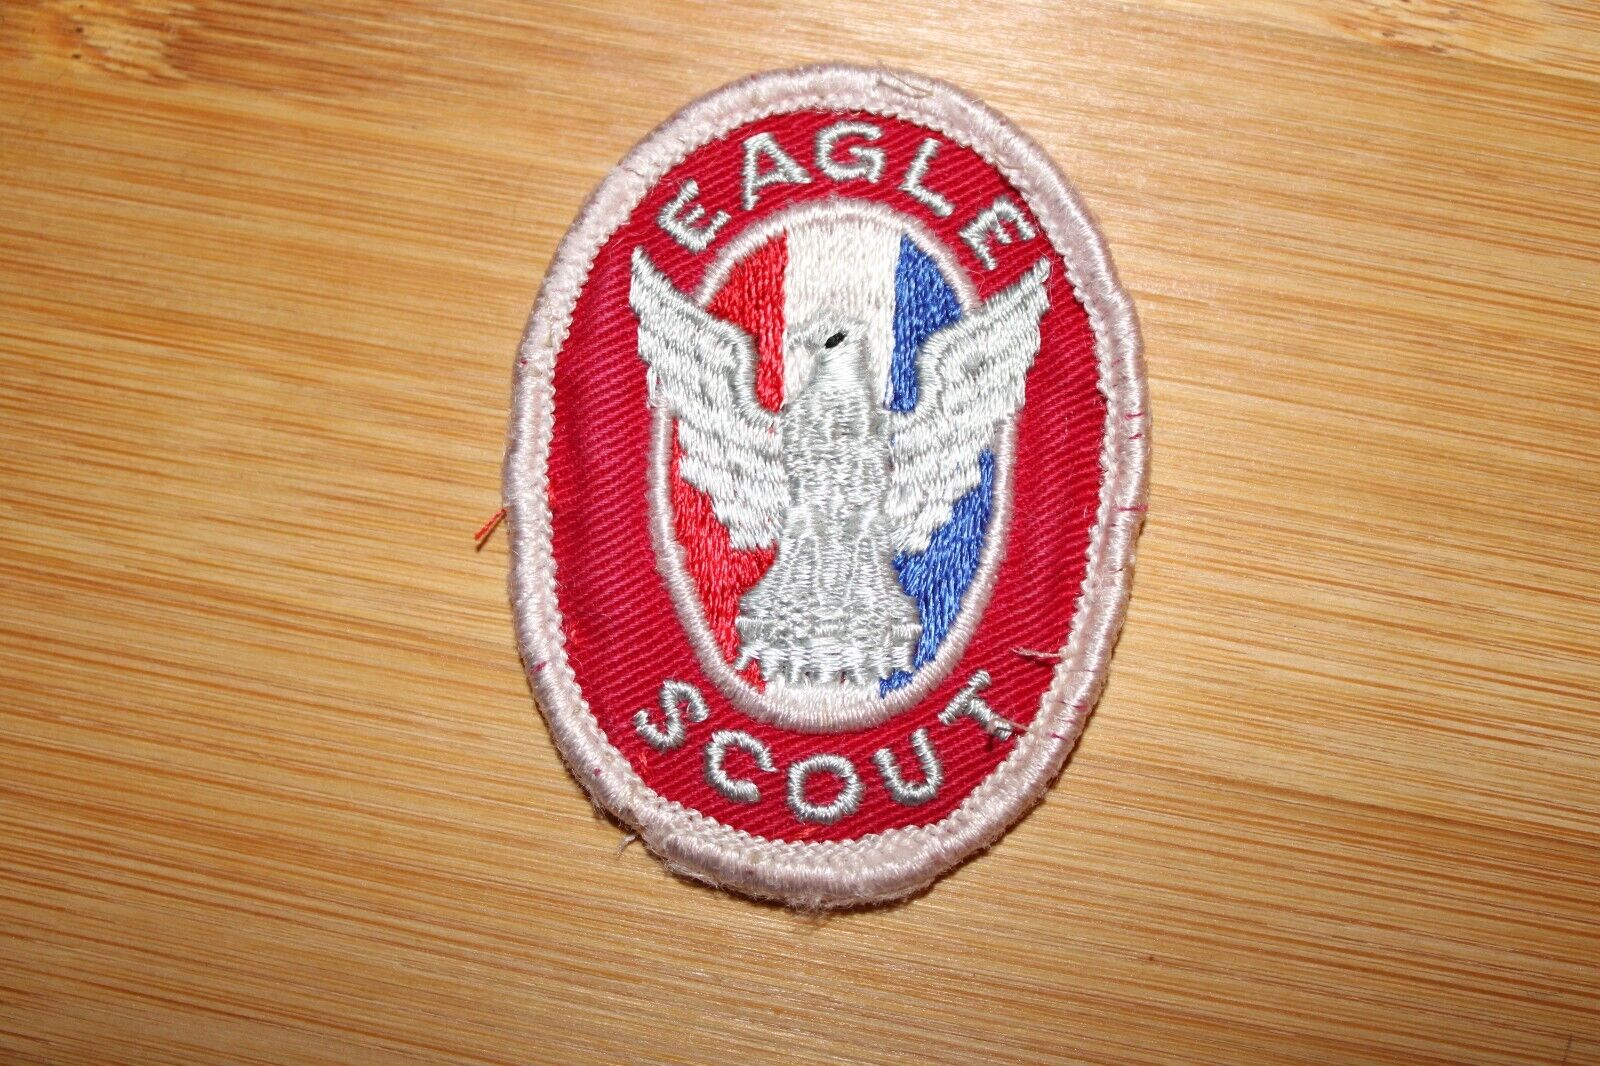 1975-1985 Eagle Scout Rank Patch Silver Eagle Boy Scouts of America BSA Patch